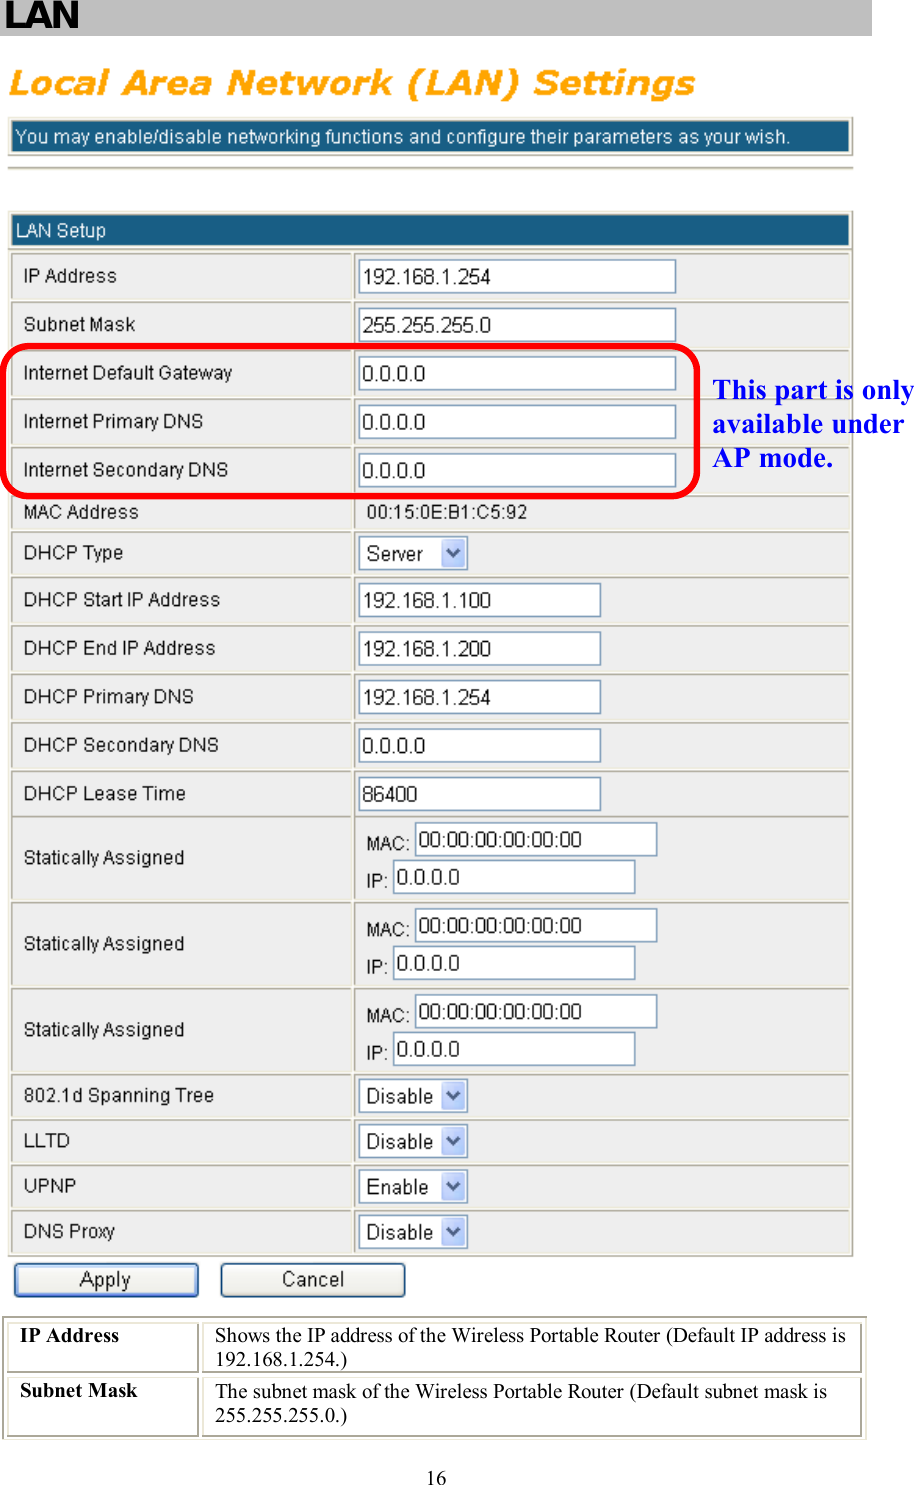    16 LAN   IP Address  Shows the IP address of the Wireless Portable Router (Default IP address is 192.168.1.254.) Subnet Mask  The subnet mask of the Wireless Portable Router (Default subnet mask is 255.255.255.0.) This part is only available under AP mode. 